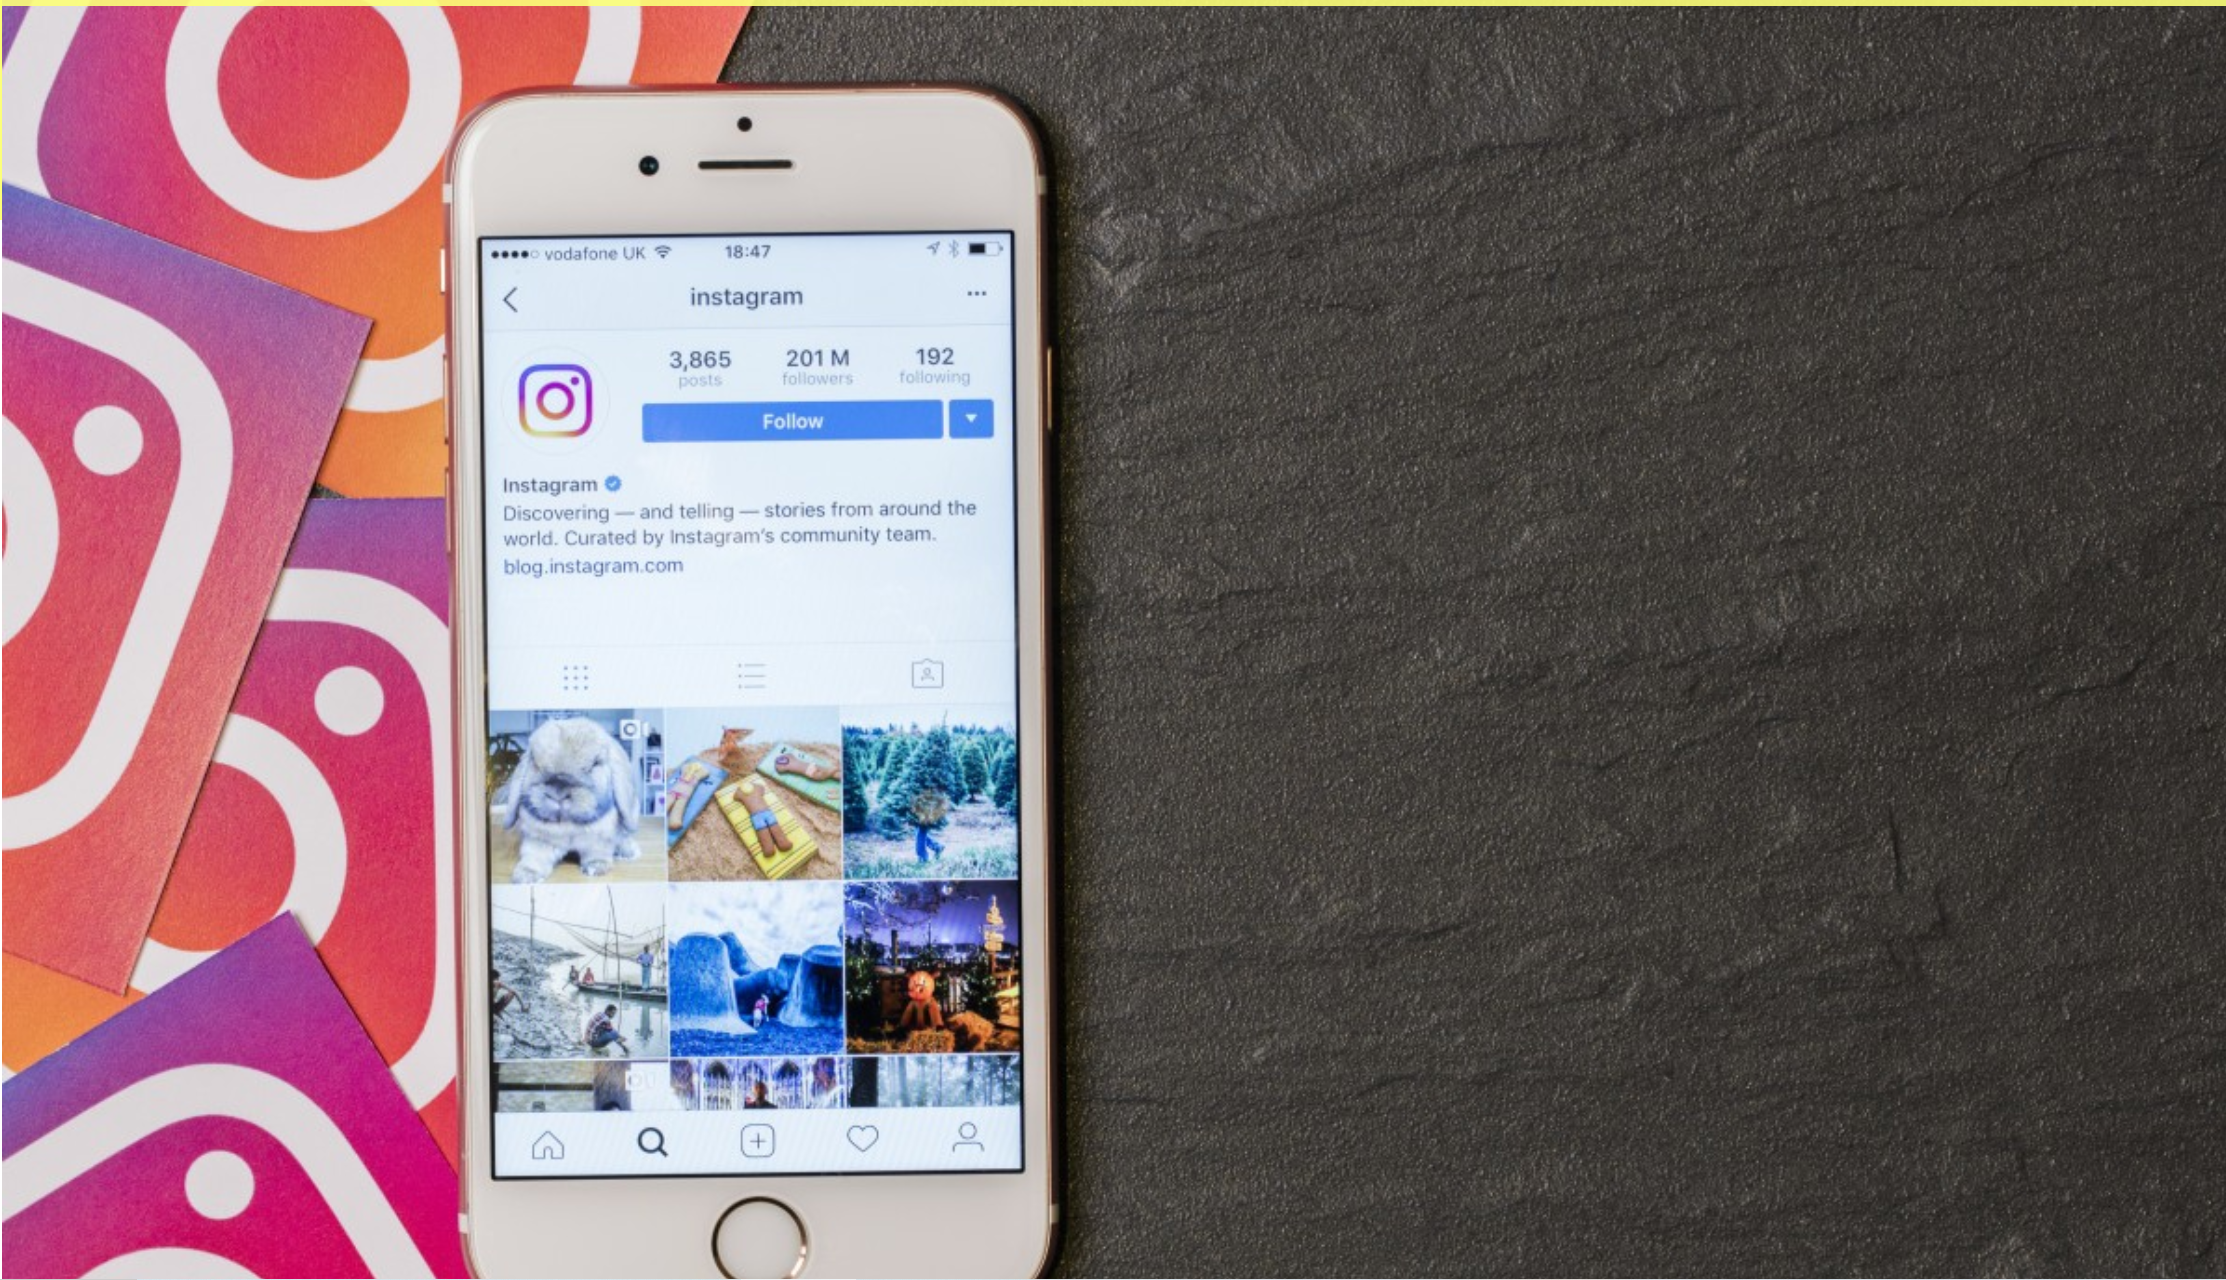 FUN INSTAGRAM HASHTAGS - Hashtags Instagram Users Could Adopt